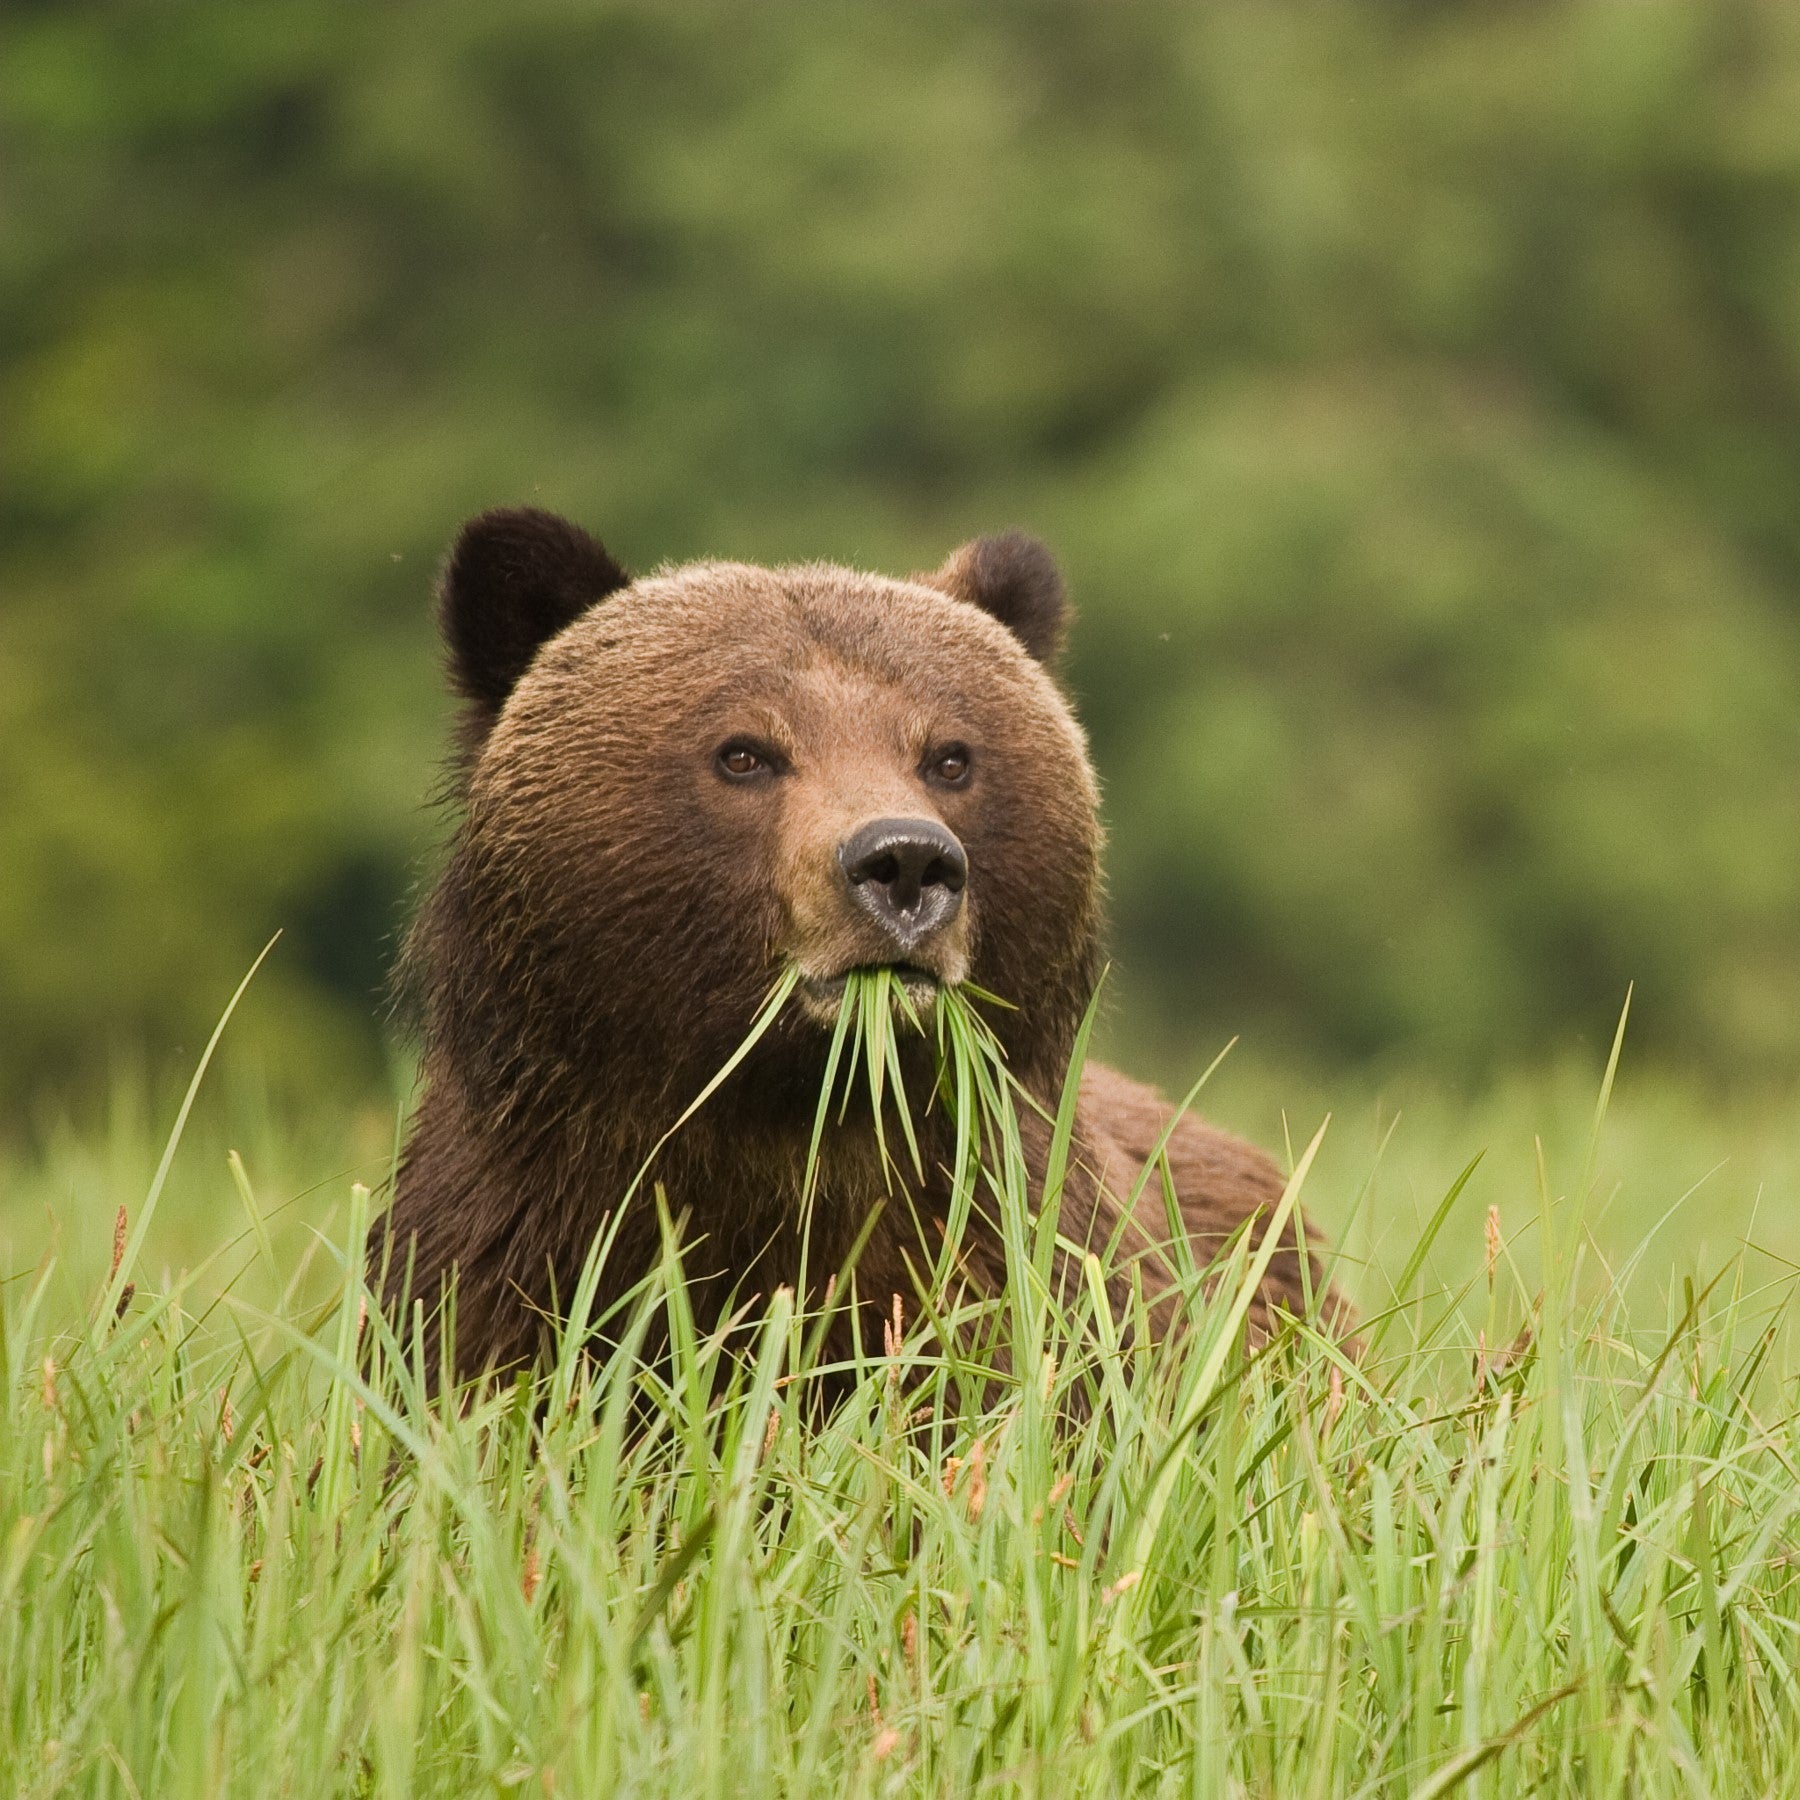 A grizzly bear eating grass 